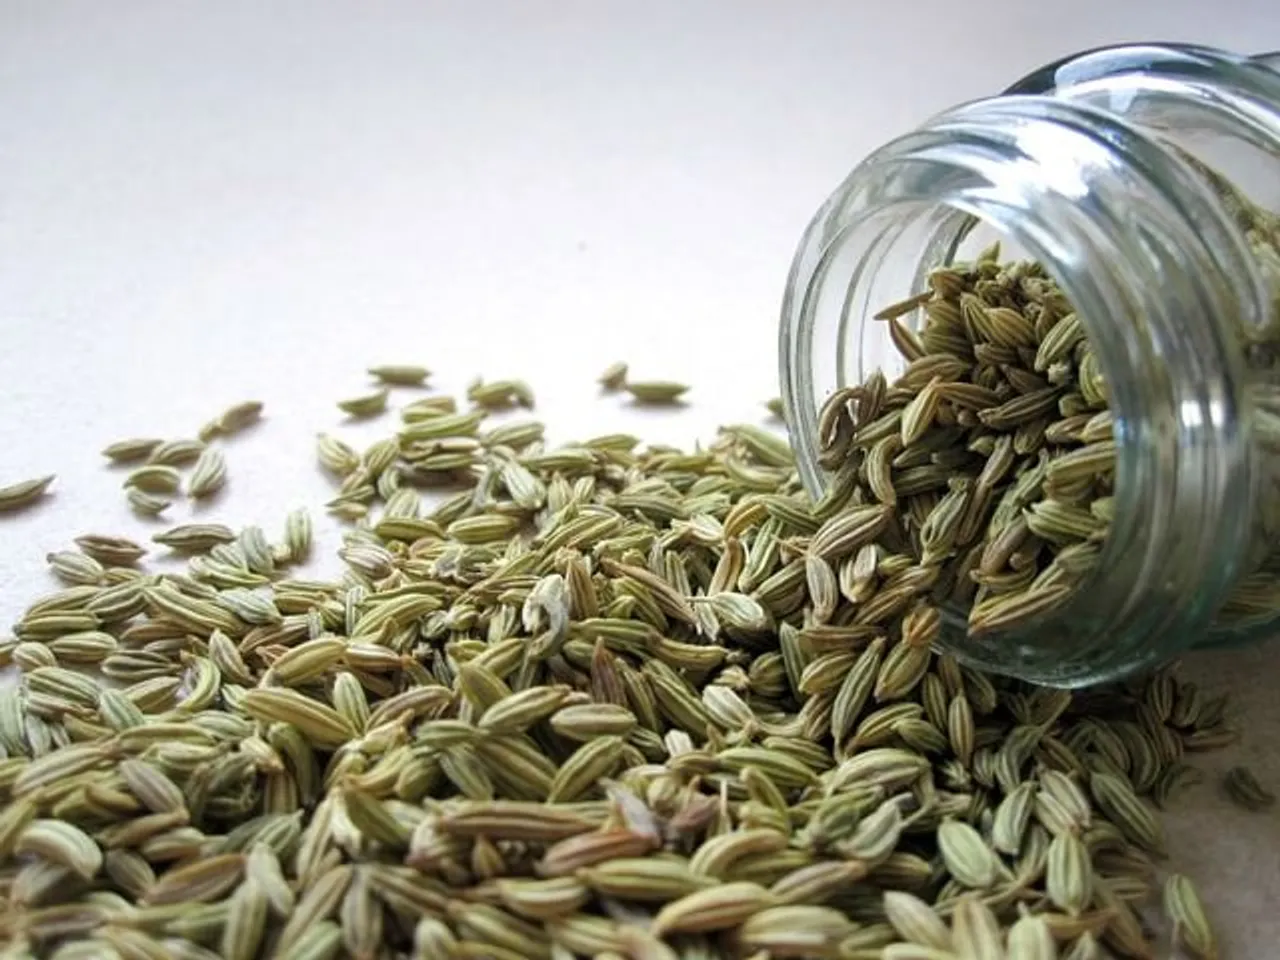 Fennel seeds have various health benefits